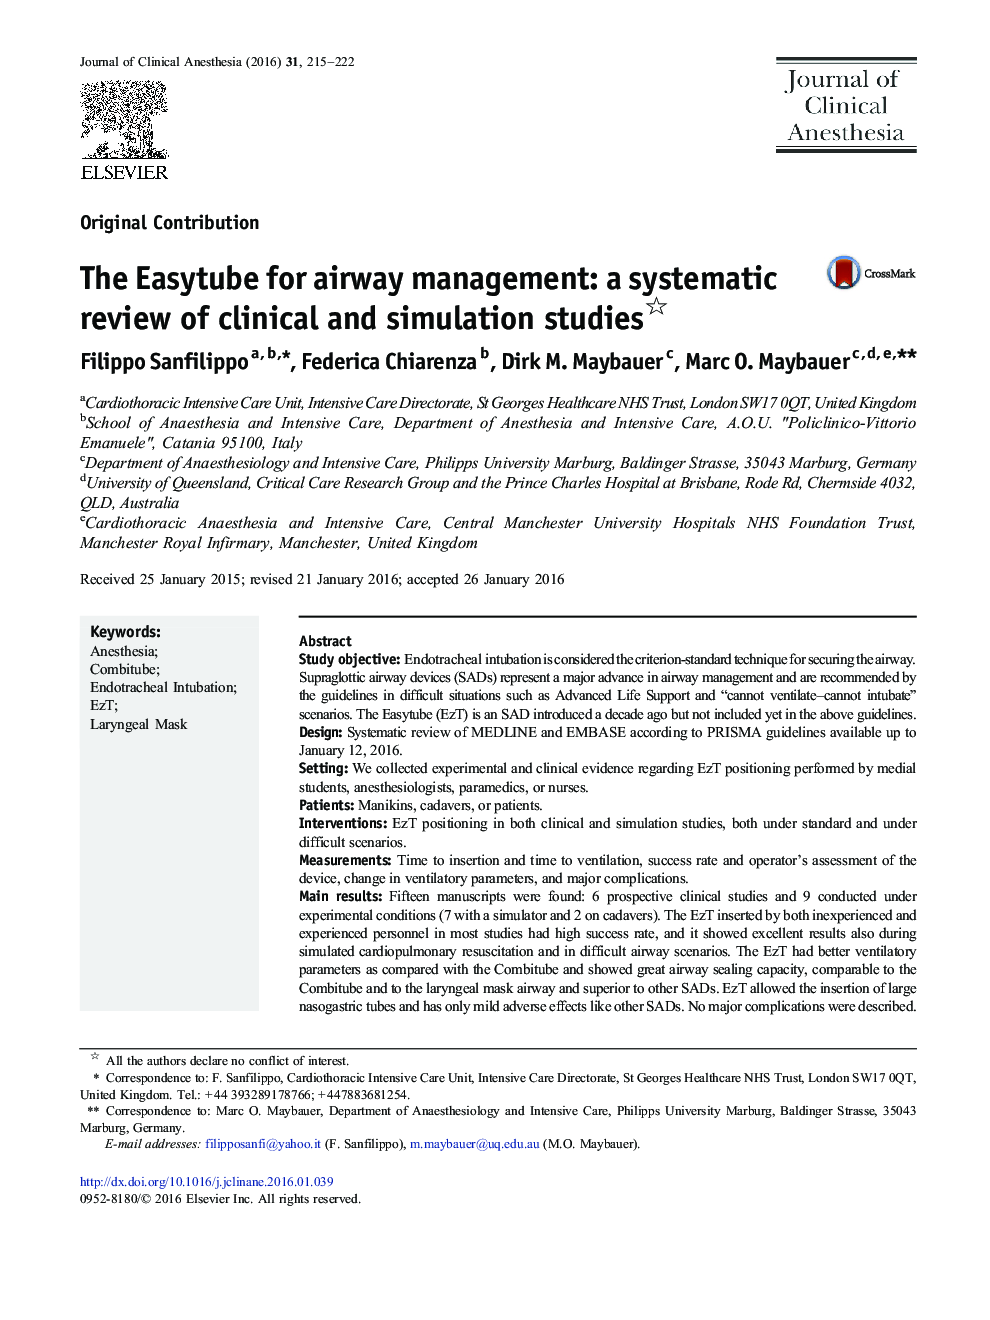 The Easytube for airway management: a systematic review of clinical and simulation studies